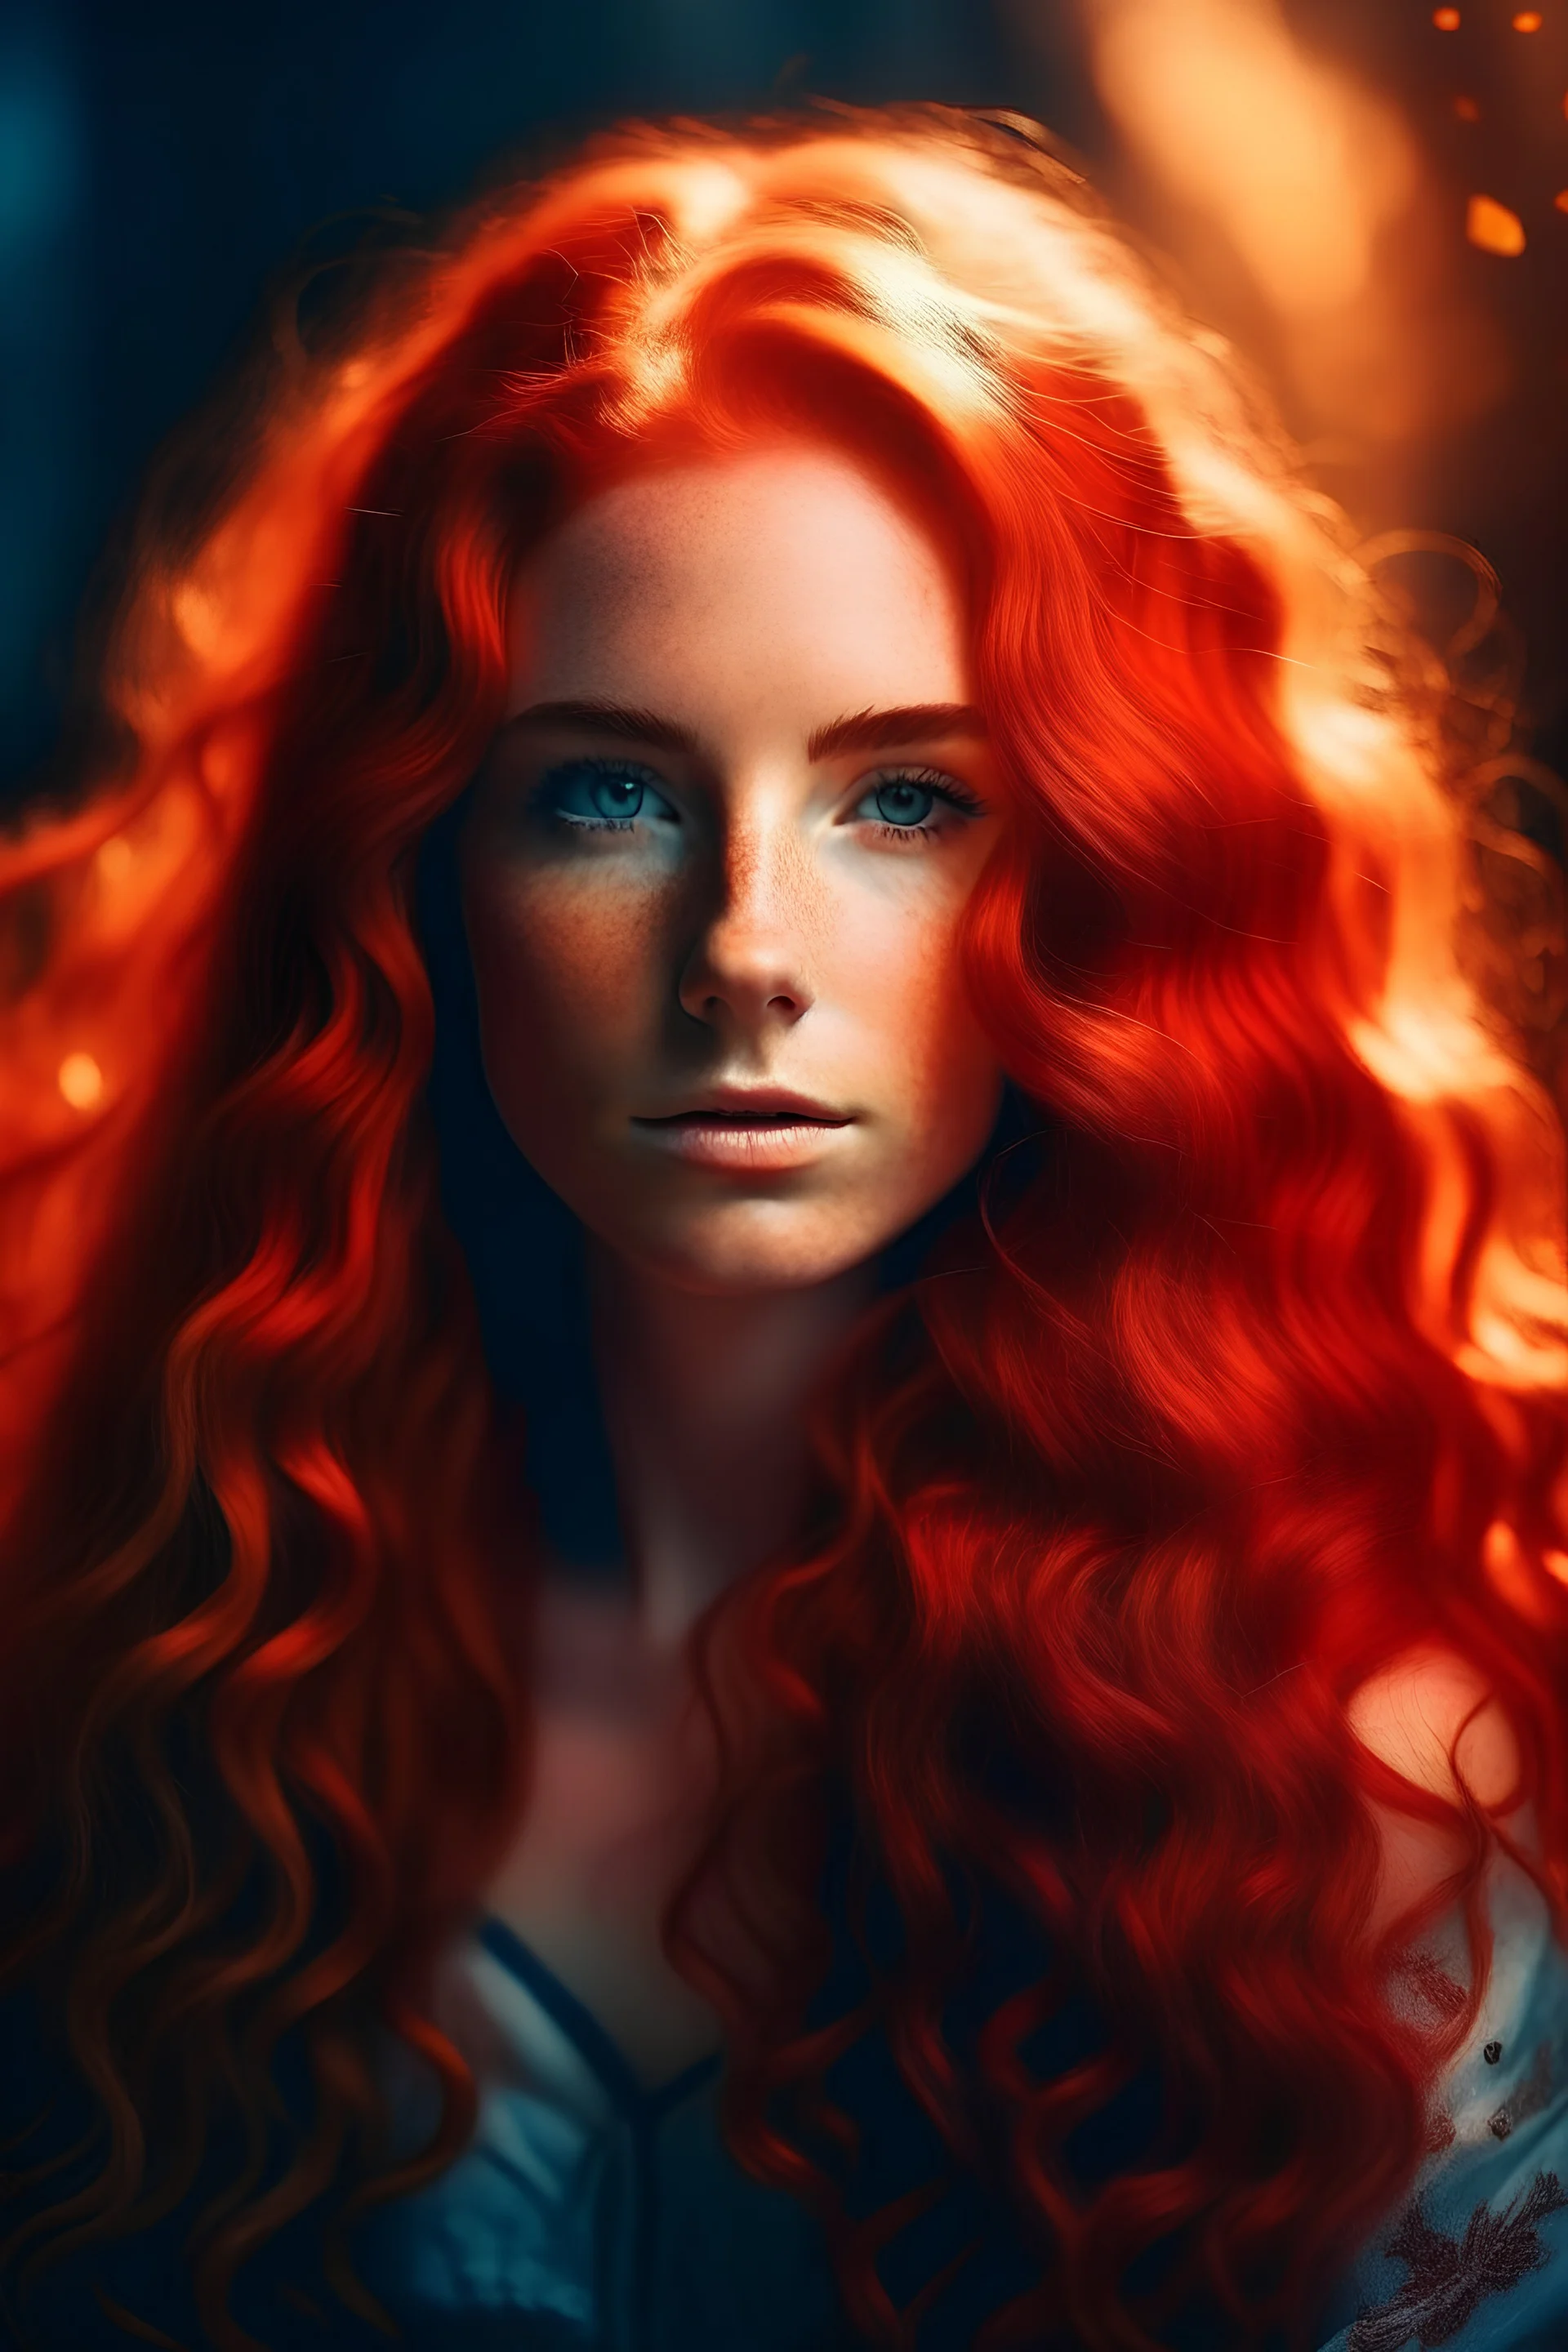 ((Close-up portrait)), (RAW Photo), Stunning portrait of the beautiful Queen of the Cosmos, with suntan skin, sitting on an Etheral Throne, ((Gorgeous Long Curly Red Hair:1.1)), Use warm tones and soft lighting.